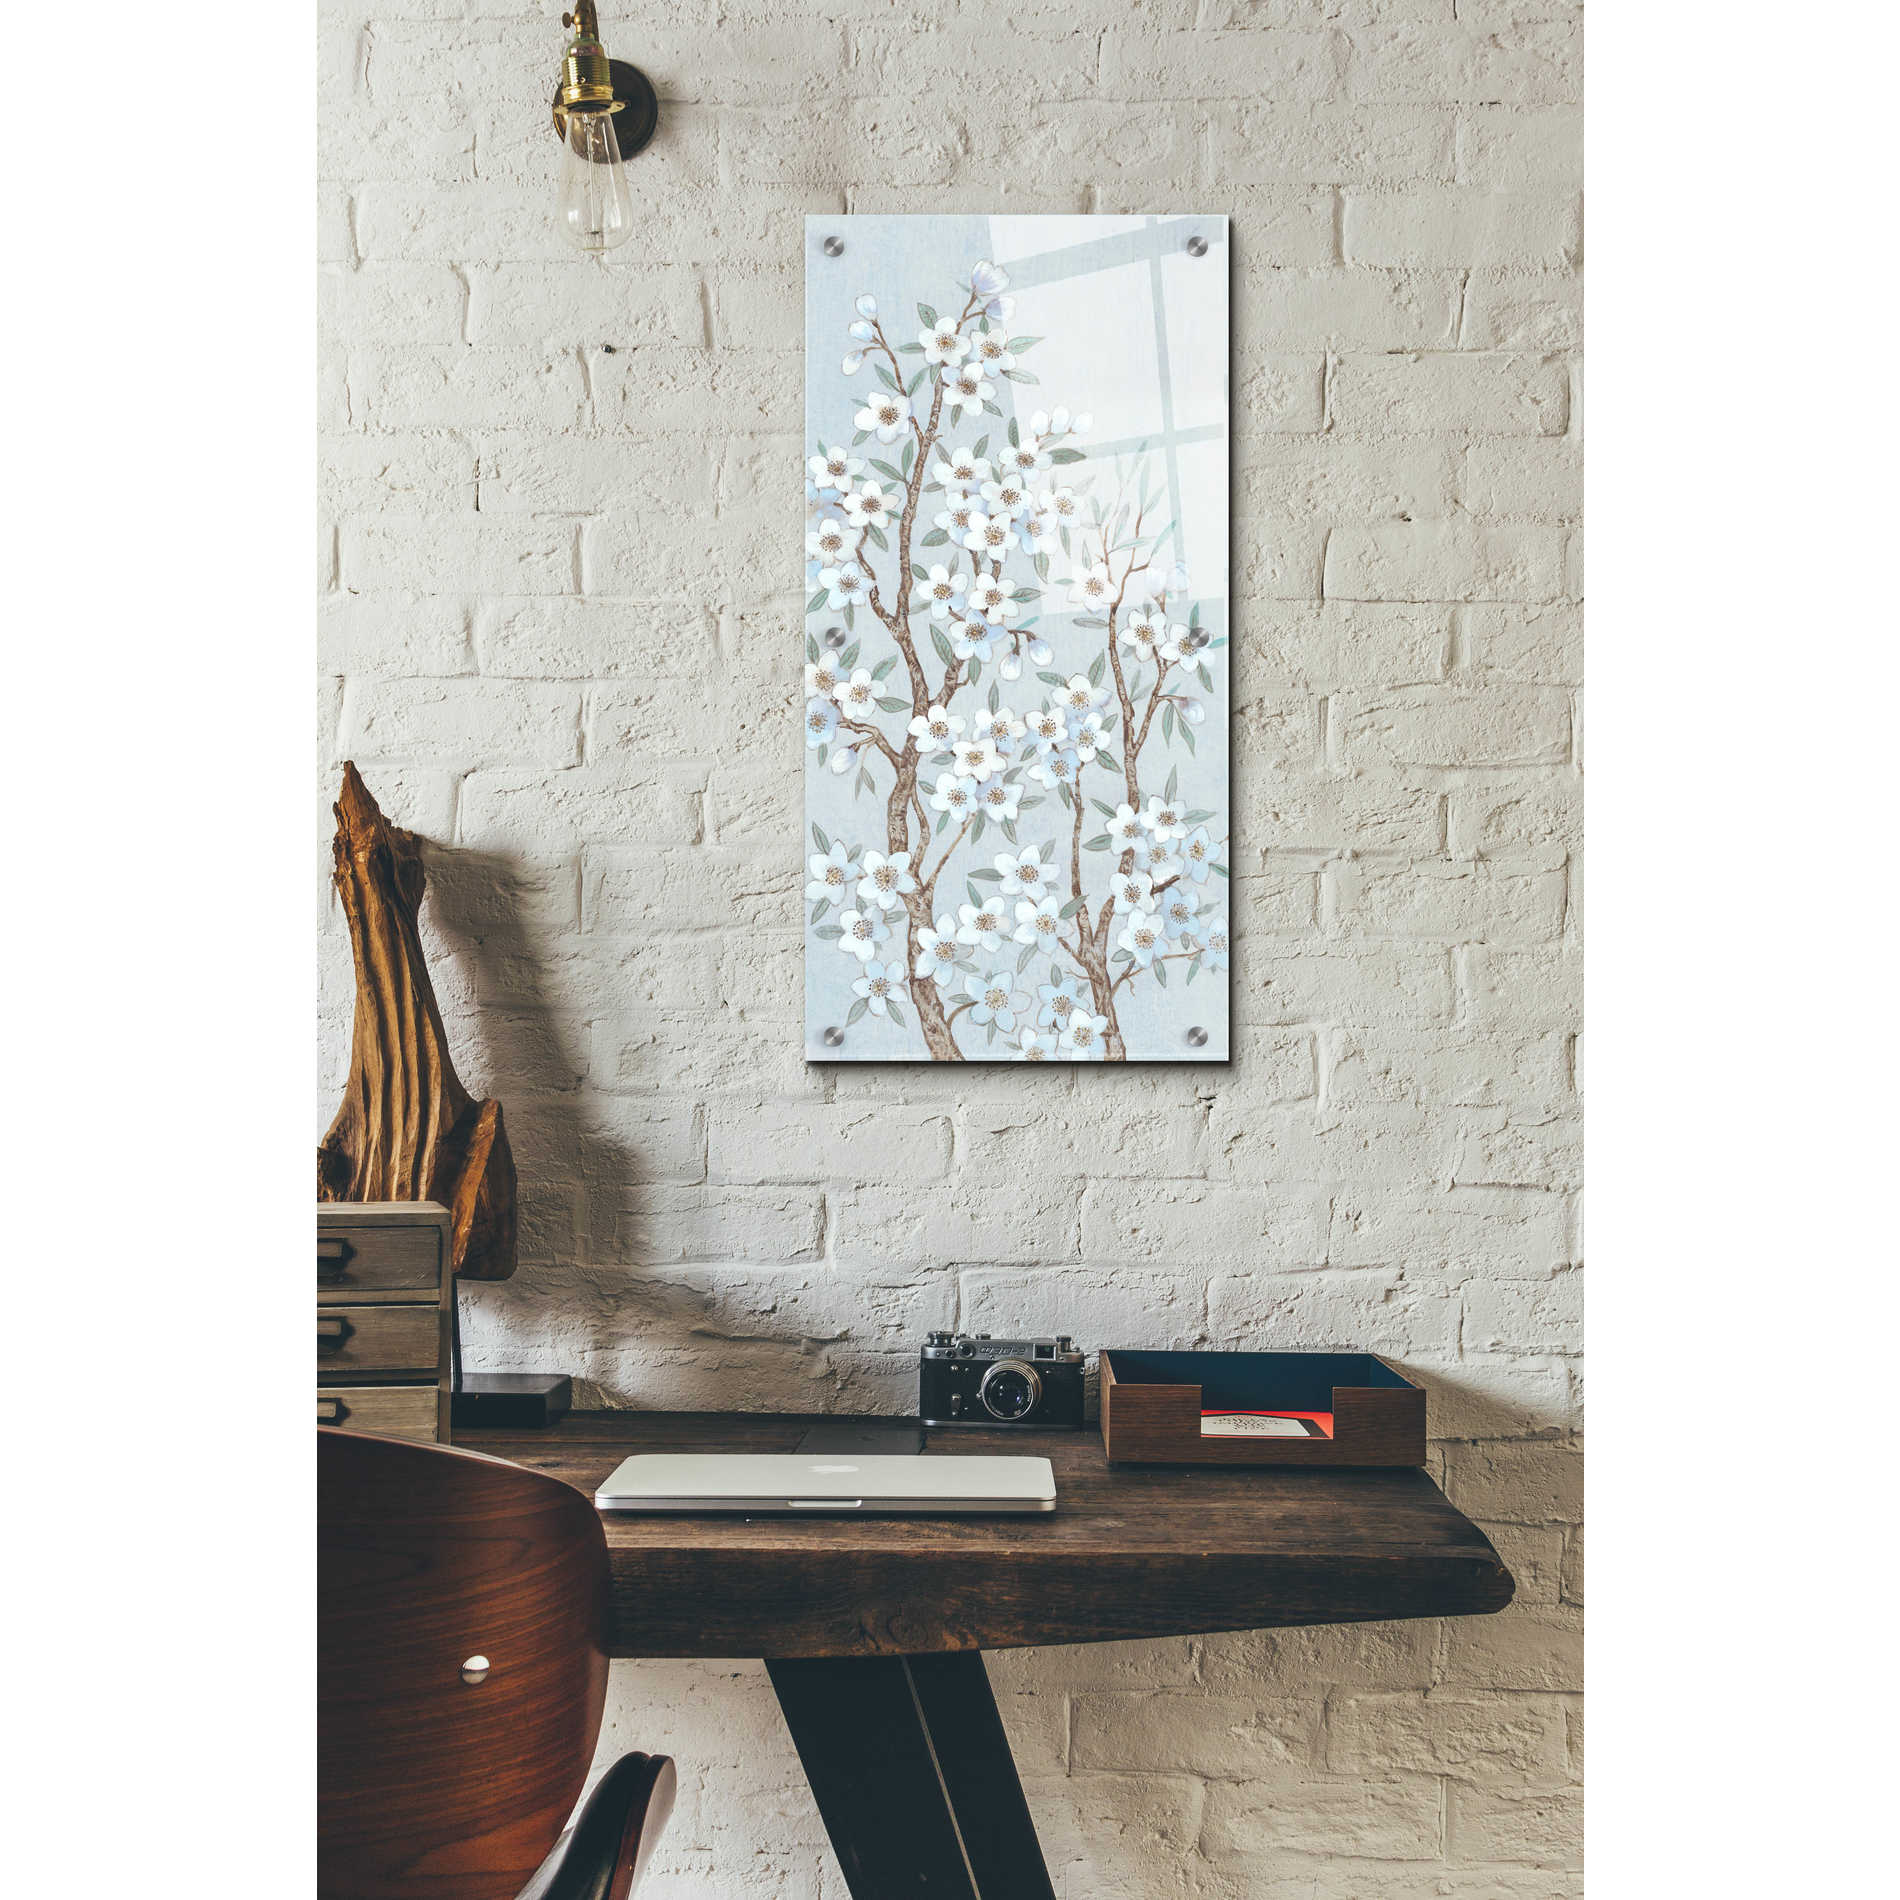 Epic Art 'Branches of Blossoms II' by Tim O'Toole, Acrylic Glass Wall Art,12x24